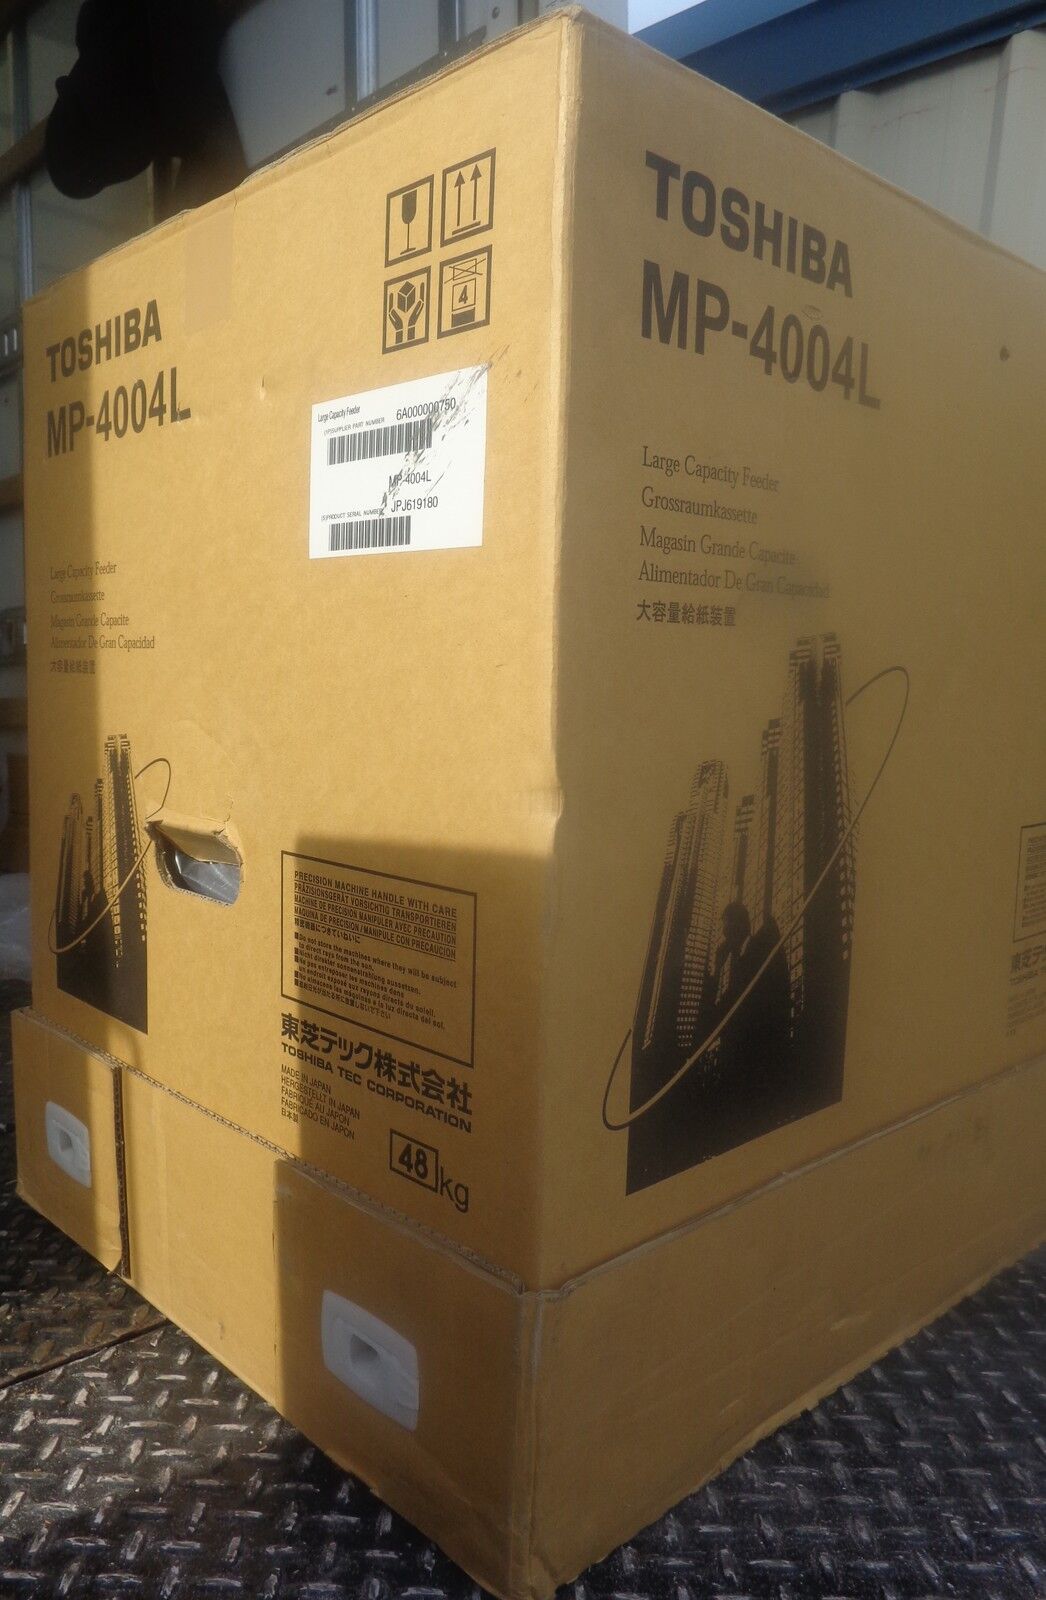 2 NEW IN BOX MP 4004L Toshiba Large Capacity Paper Feeder MP-4004L, 4,000-Sheet